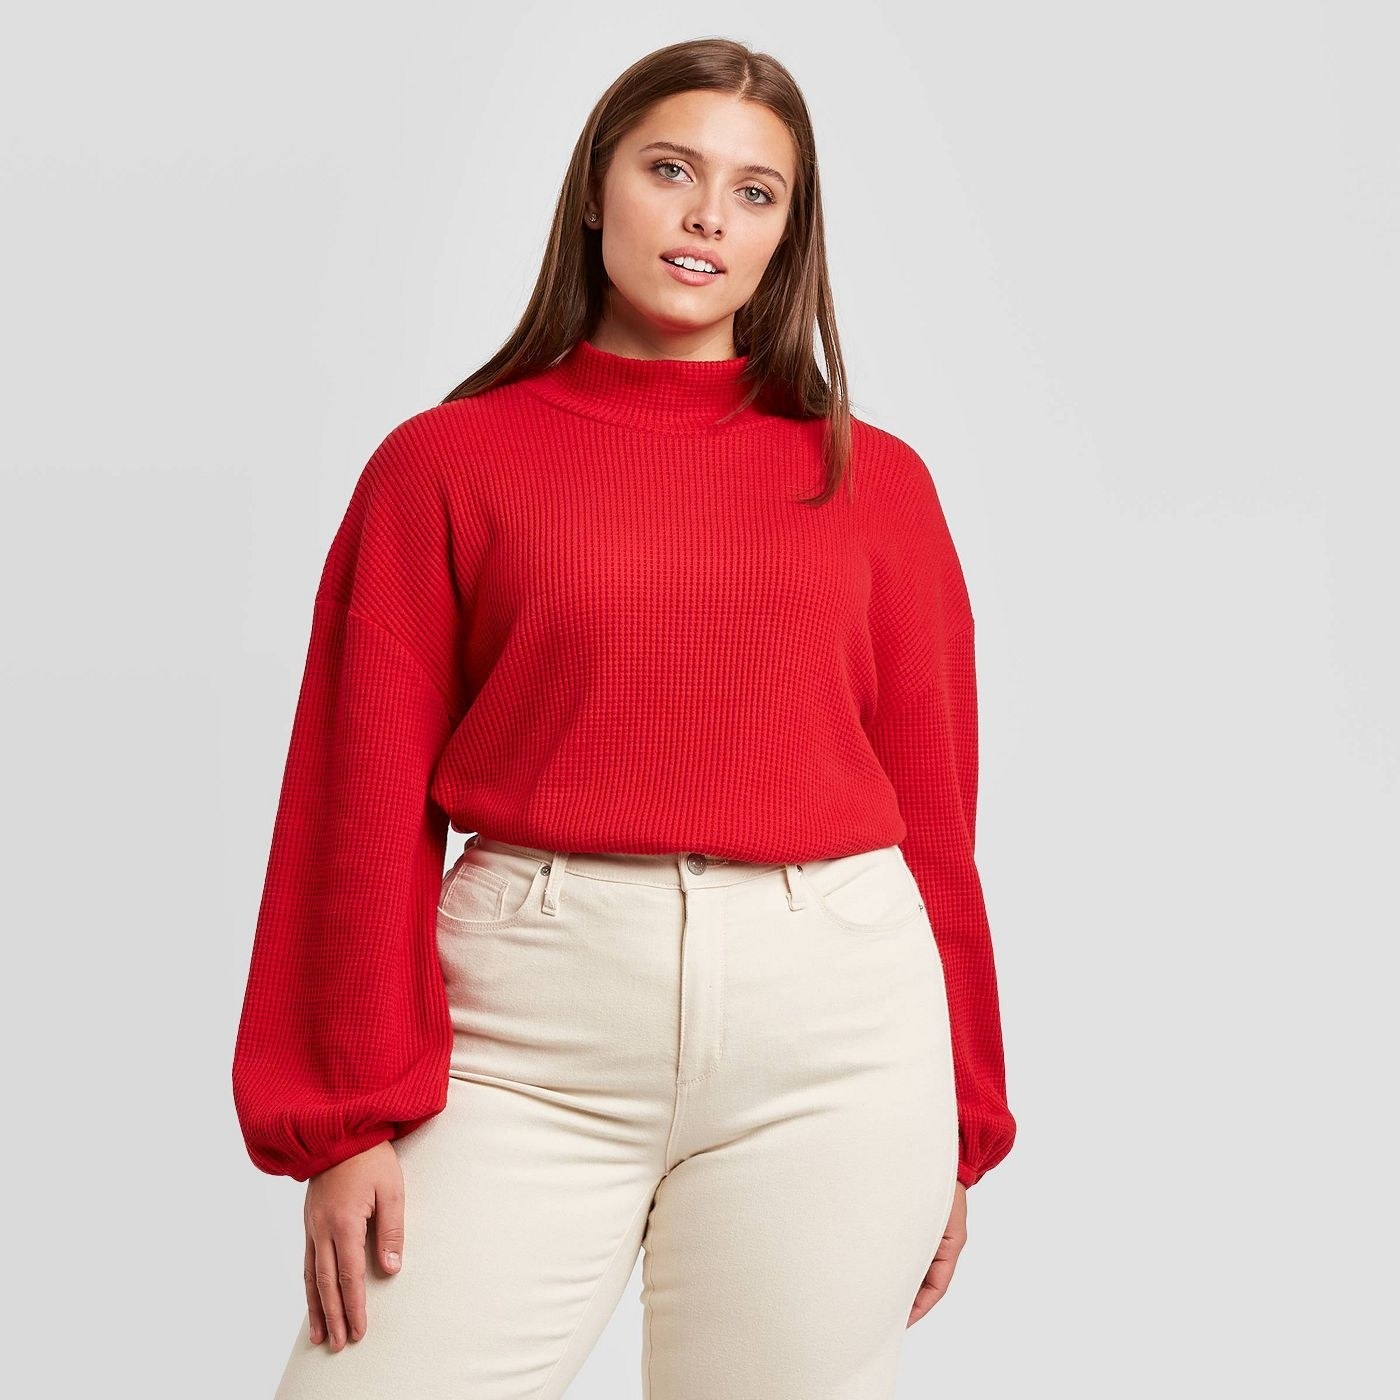 A model wearing a red mock turtleneck sweater with puffy sleeves